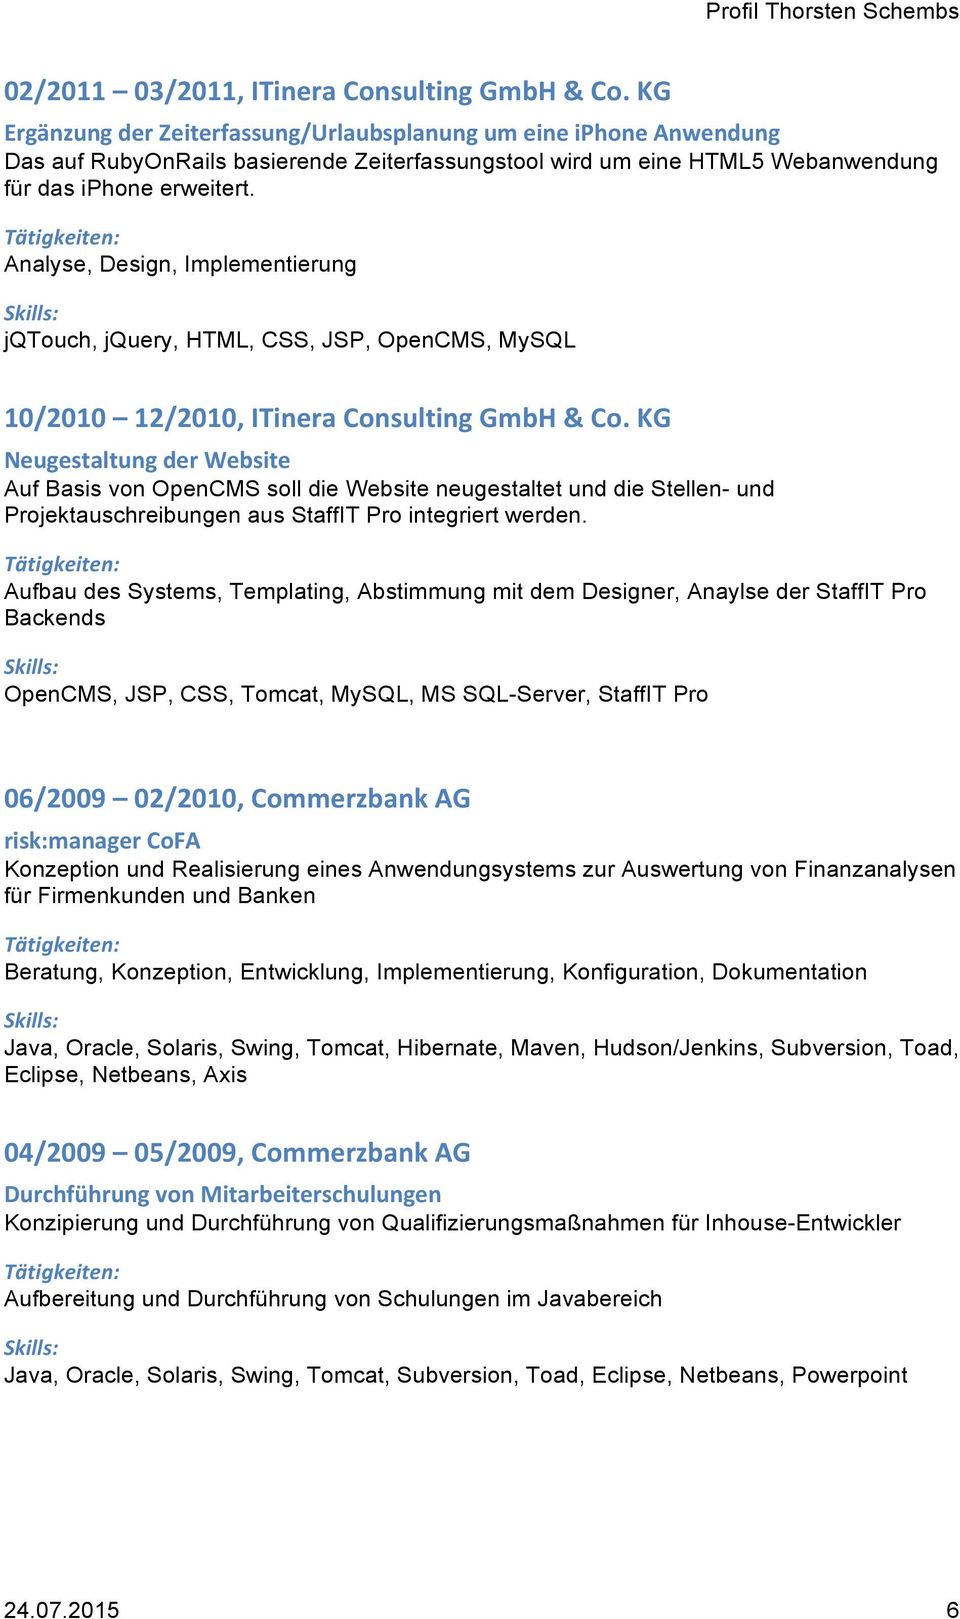 Analyse, Design, Implementierung jqtouch, jquery, HTML, CSS, JSP, OpenCMS, MySQL 10/2010 12/2010, ITinera Consulting GmbH & Co.